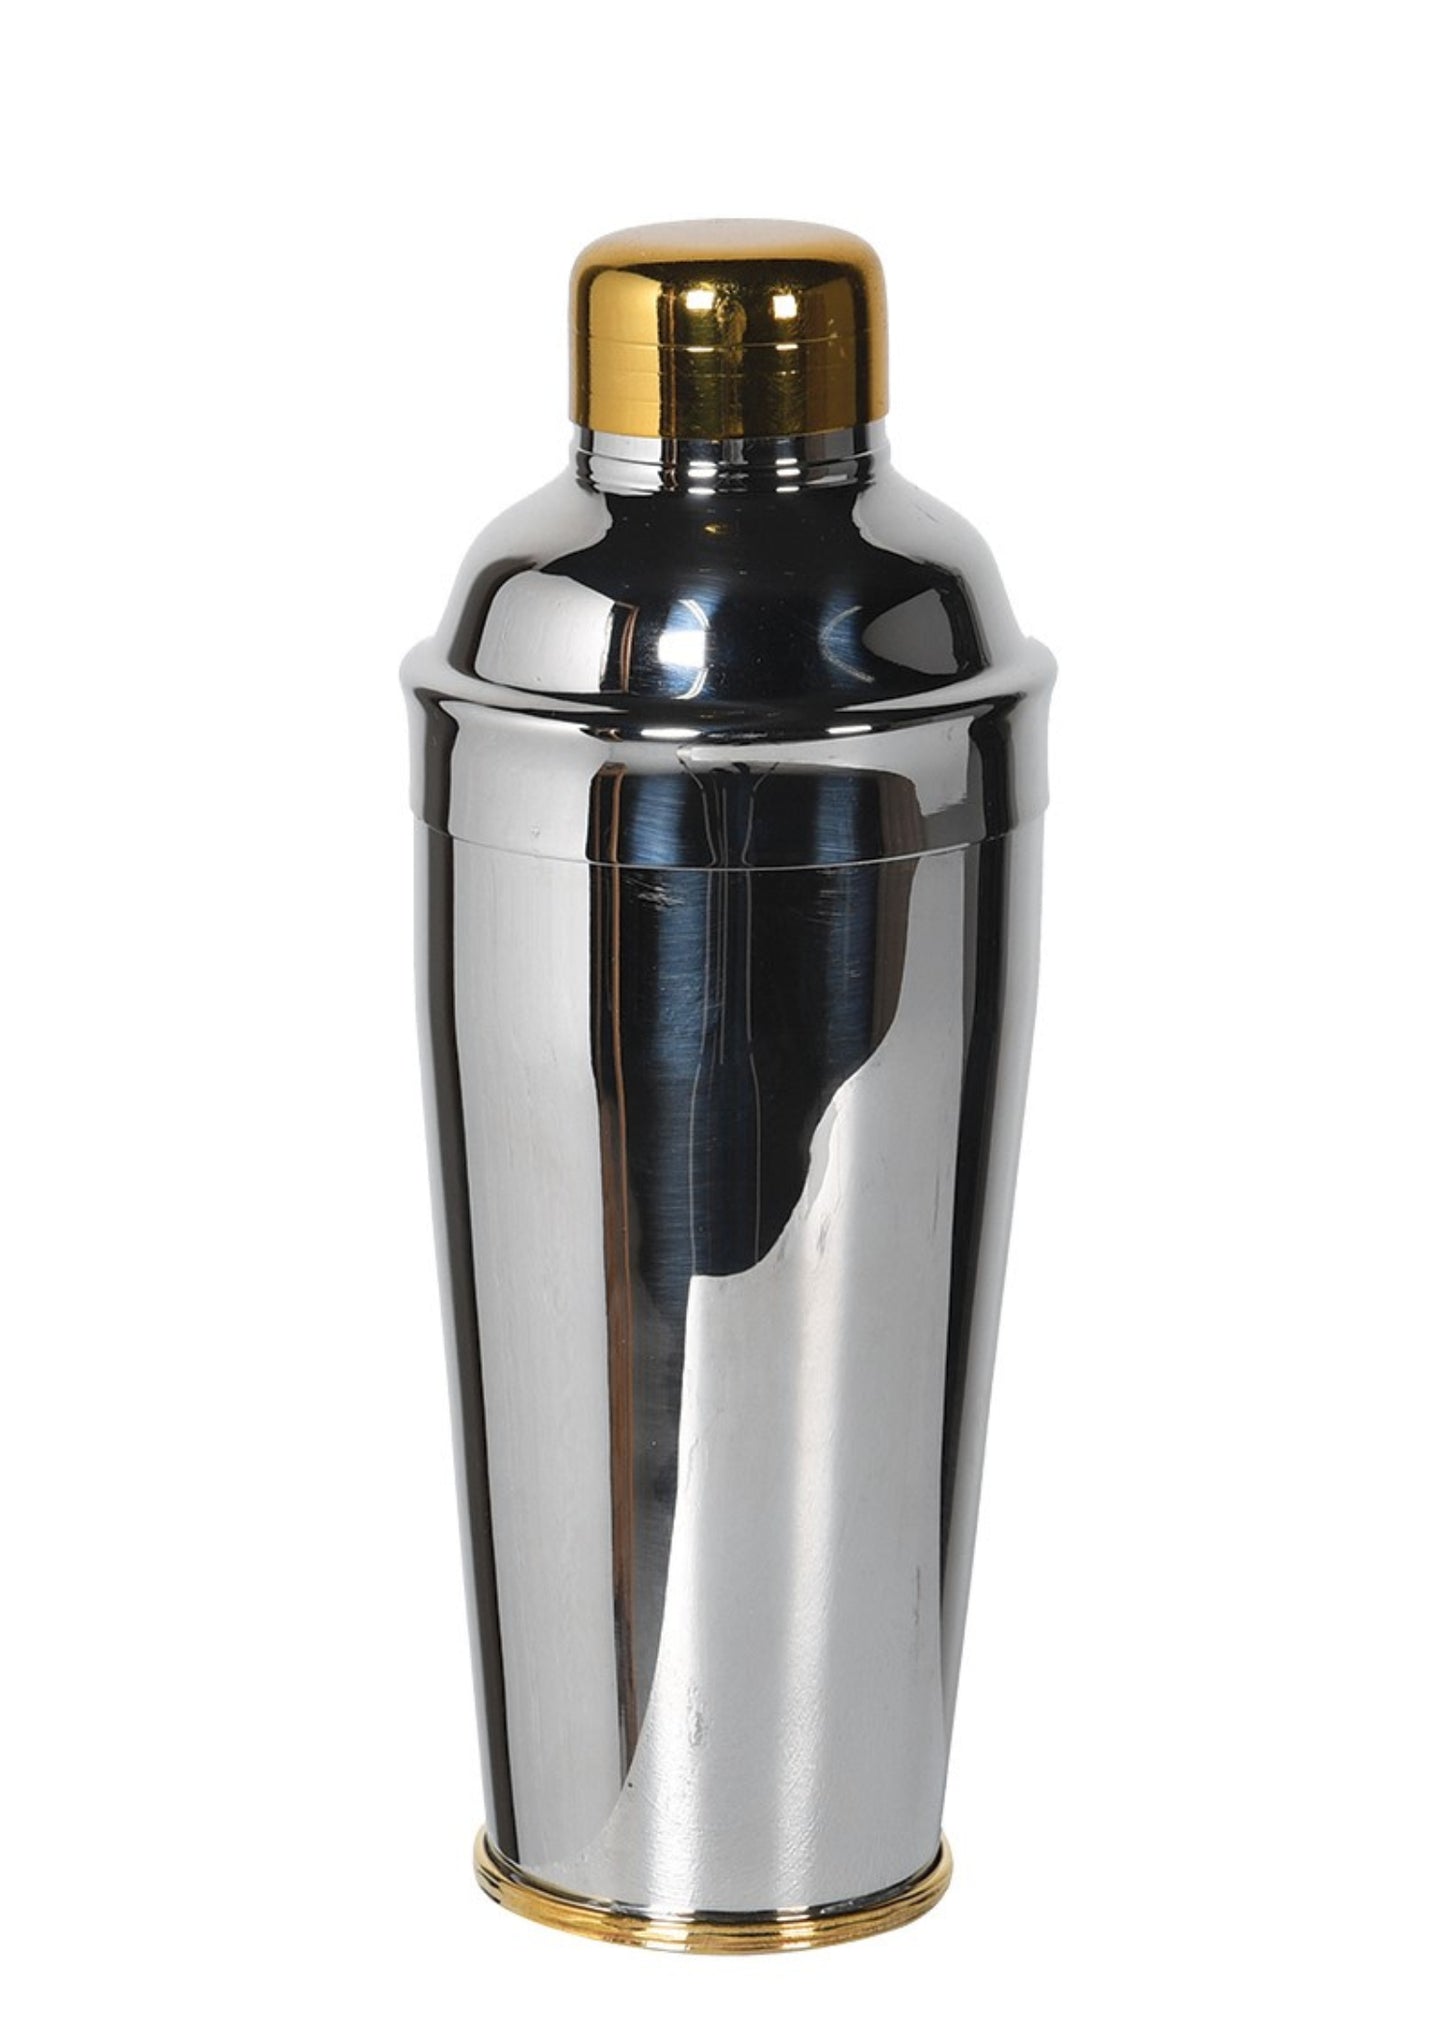 Brass & Stainless Steel Cocktail Shaker